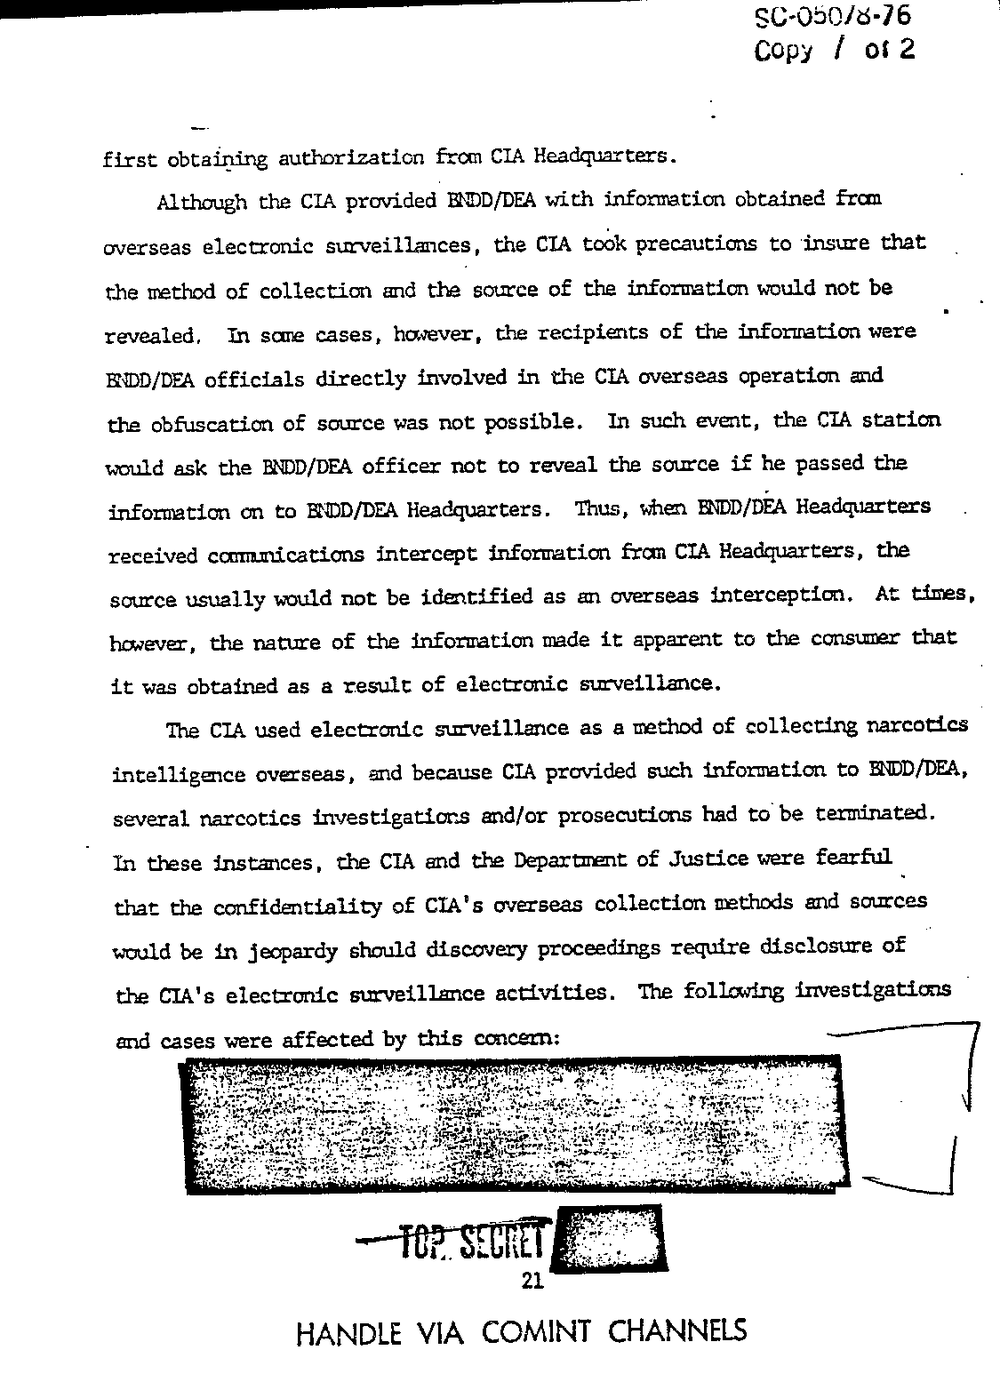 Page 29 from Report on Inquiry Into CIA Related Electronic Surveillance Activities